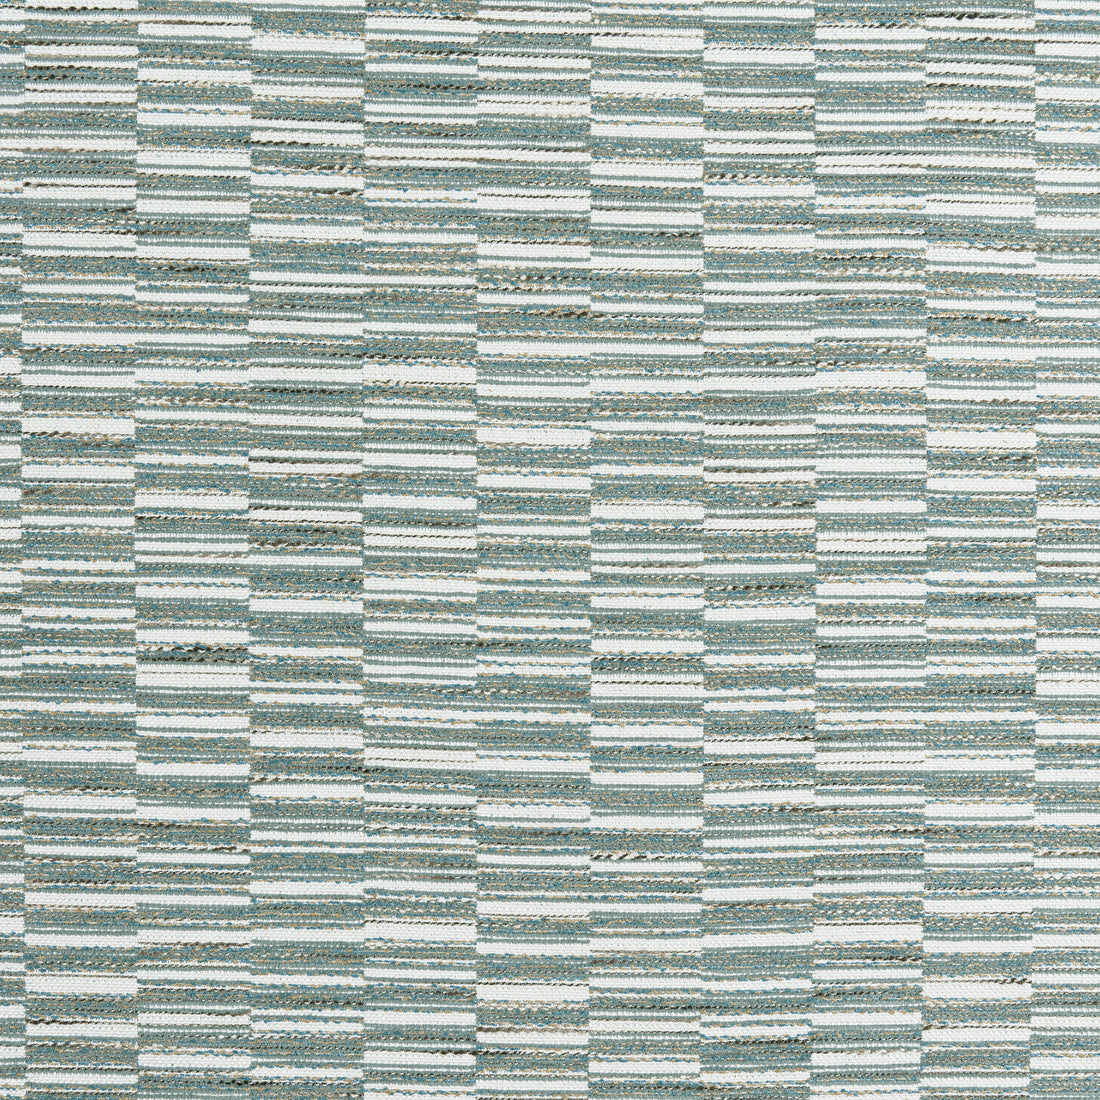 Legato fabric in fog color - pattern number W8107 - by Thibaut in the Sereno collection